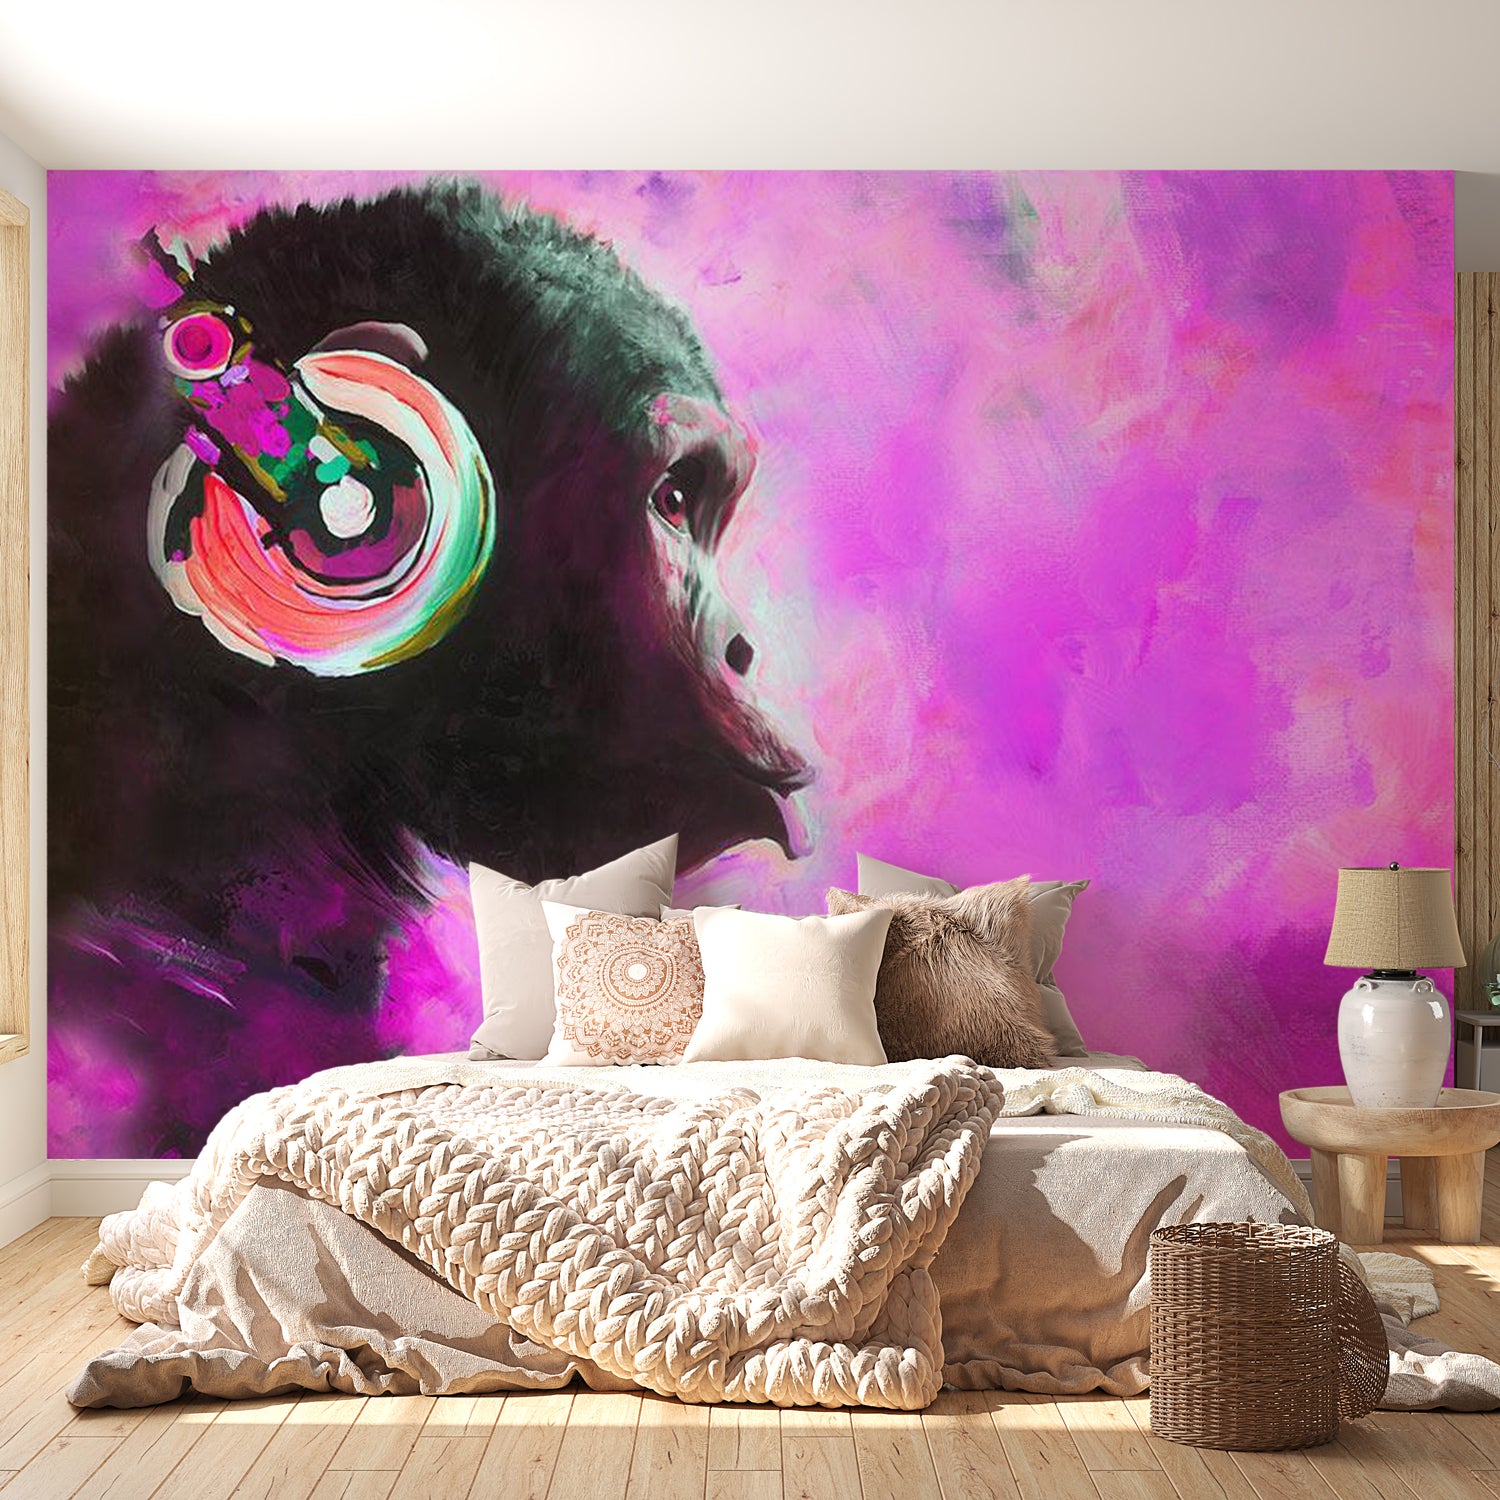 Peel & Stick Animal Wall Mural - Monkey With Headphone Pink - Removable Wall Decals